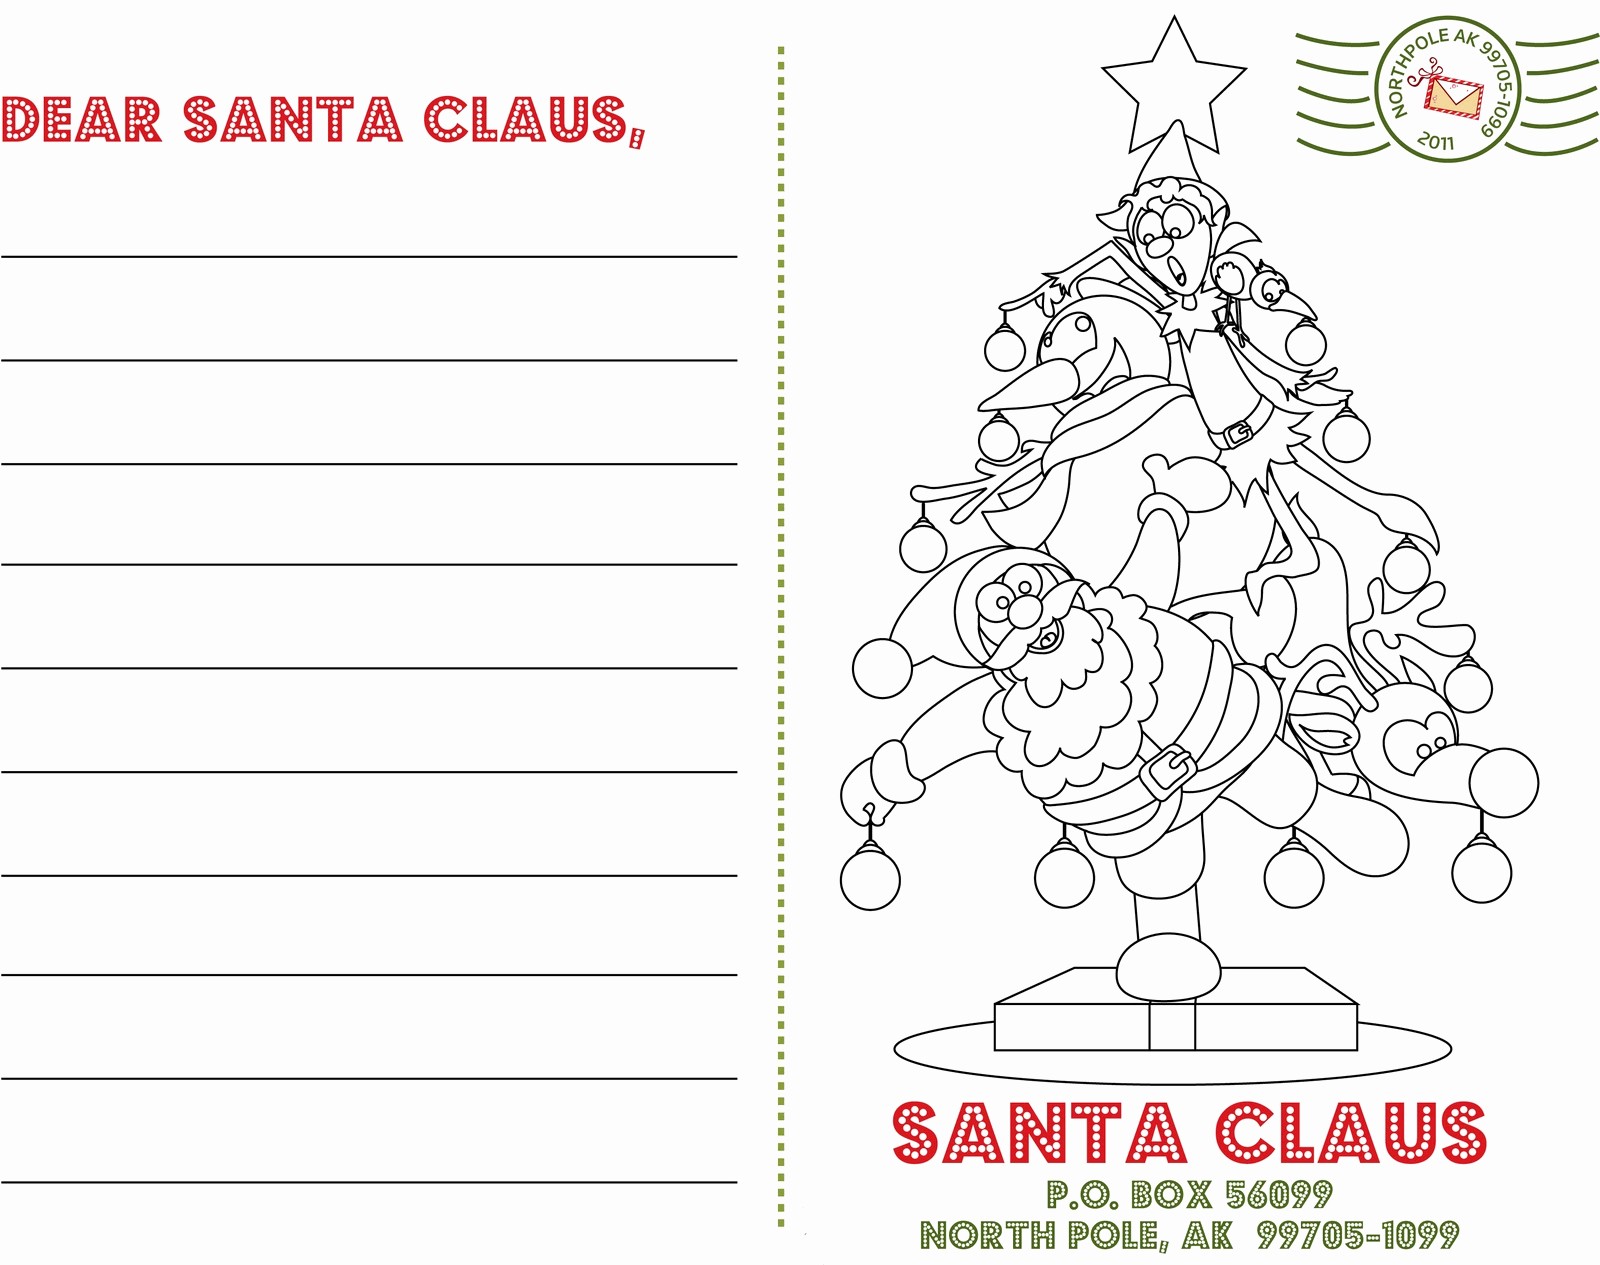 Letter to Santa Claus Templates Awesome Dear Santa Letter Template Pdf Search Results